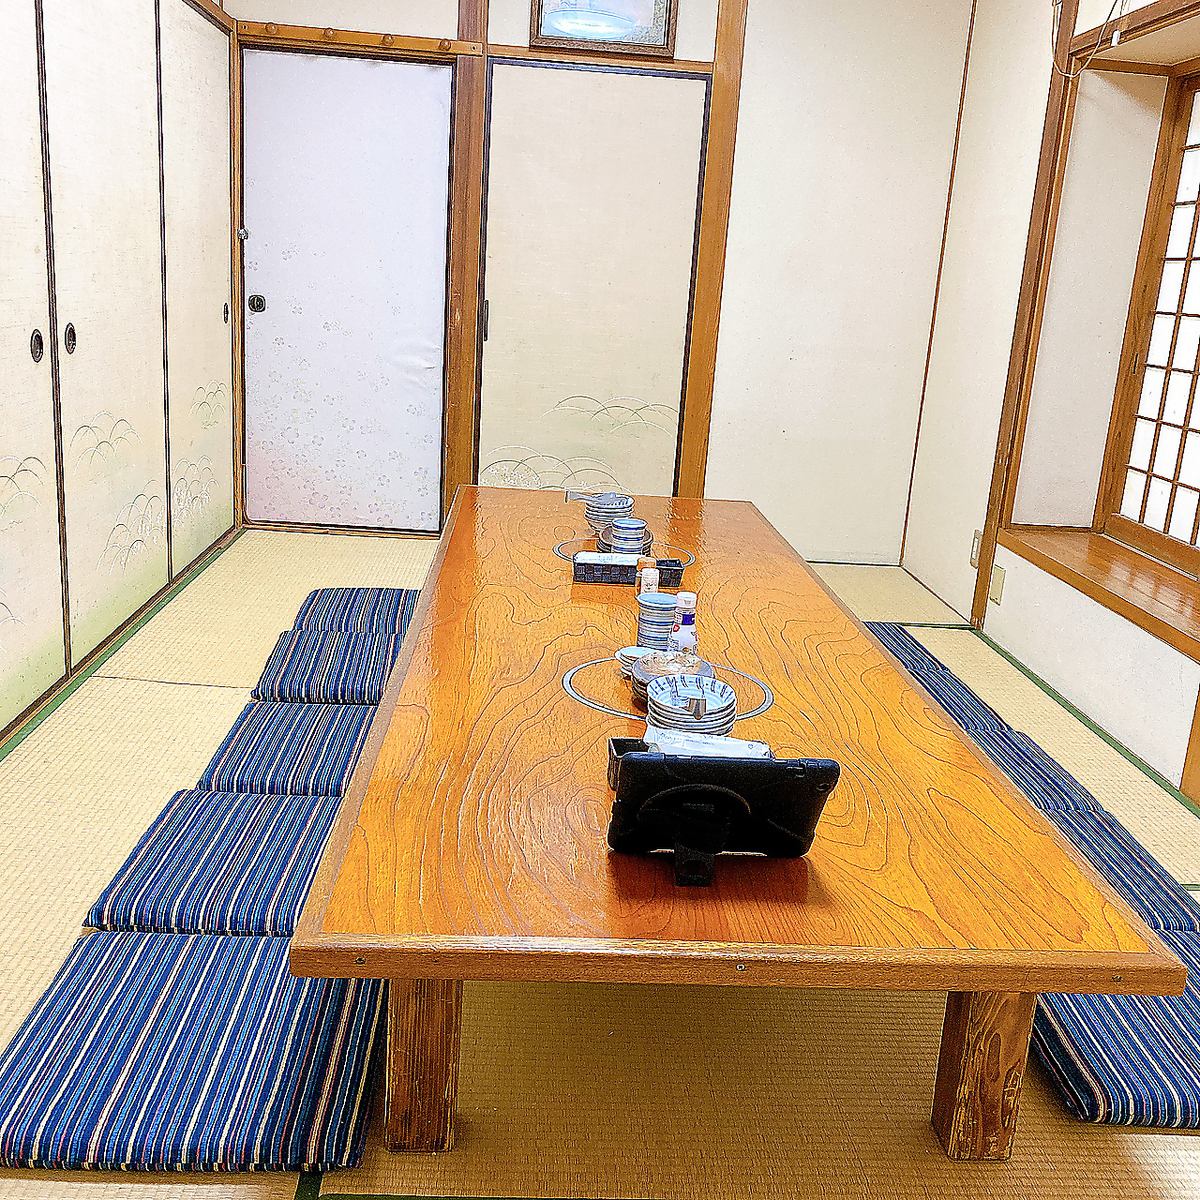 We have a private room with a tatami room that is popular for girls-only gatherings and banquets.